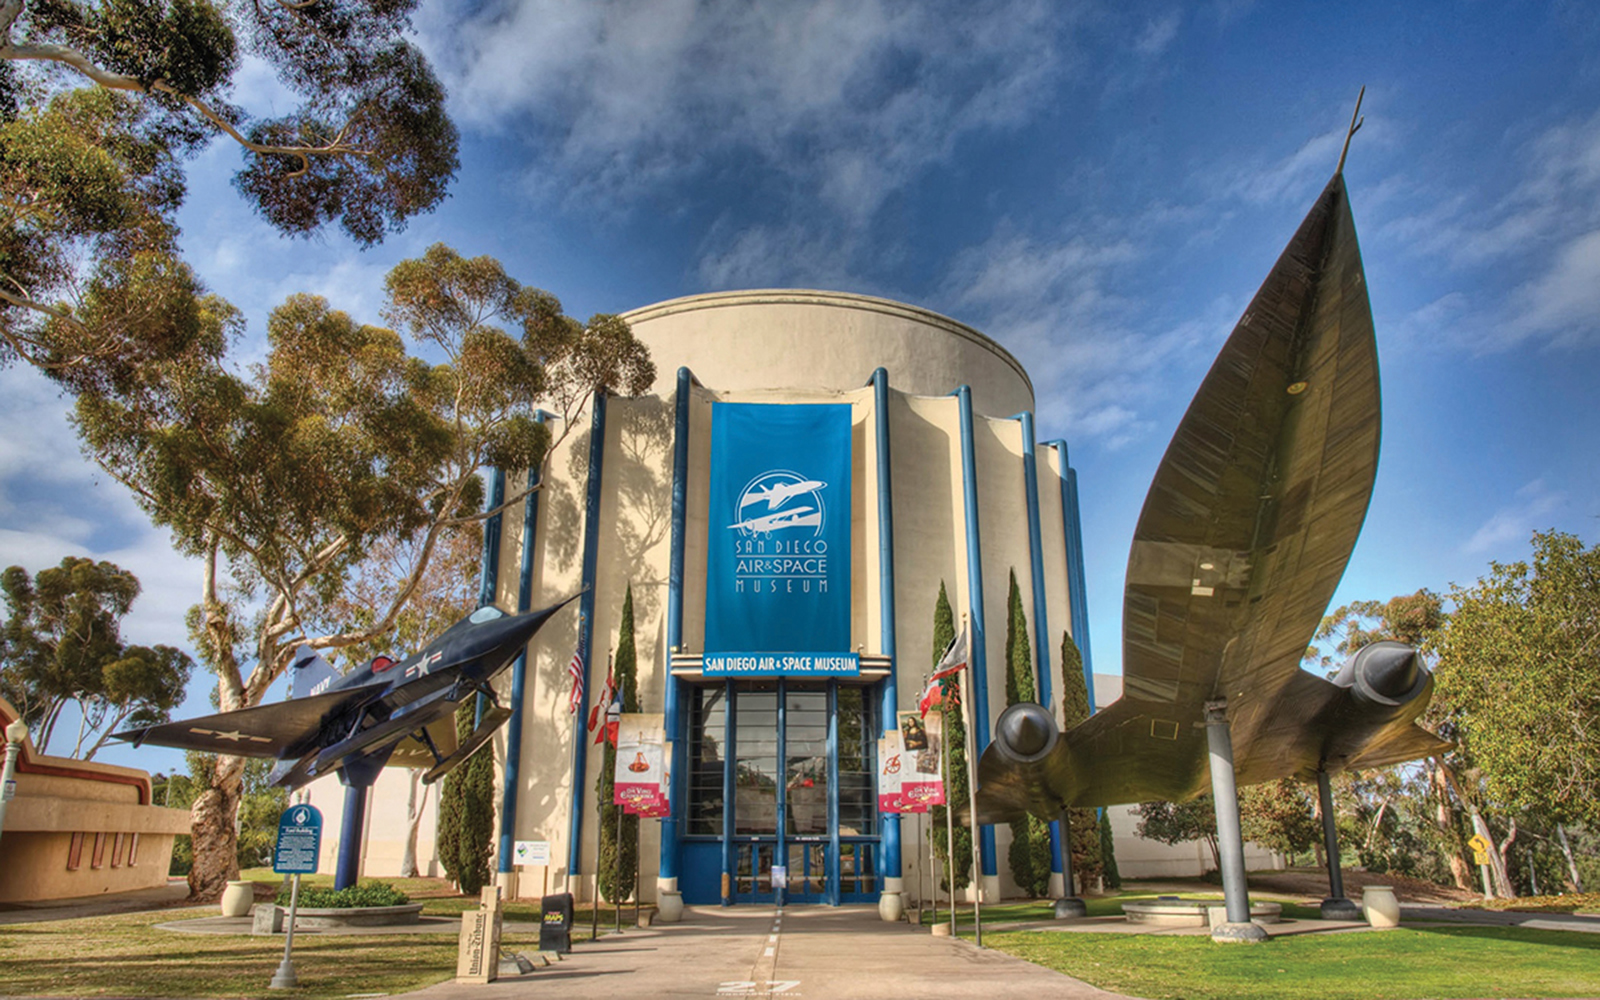 Entrance to San Diego Air and Space Museum